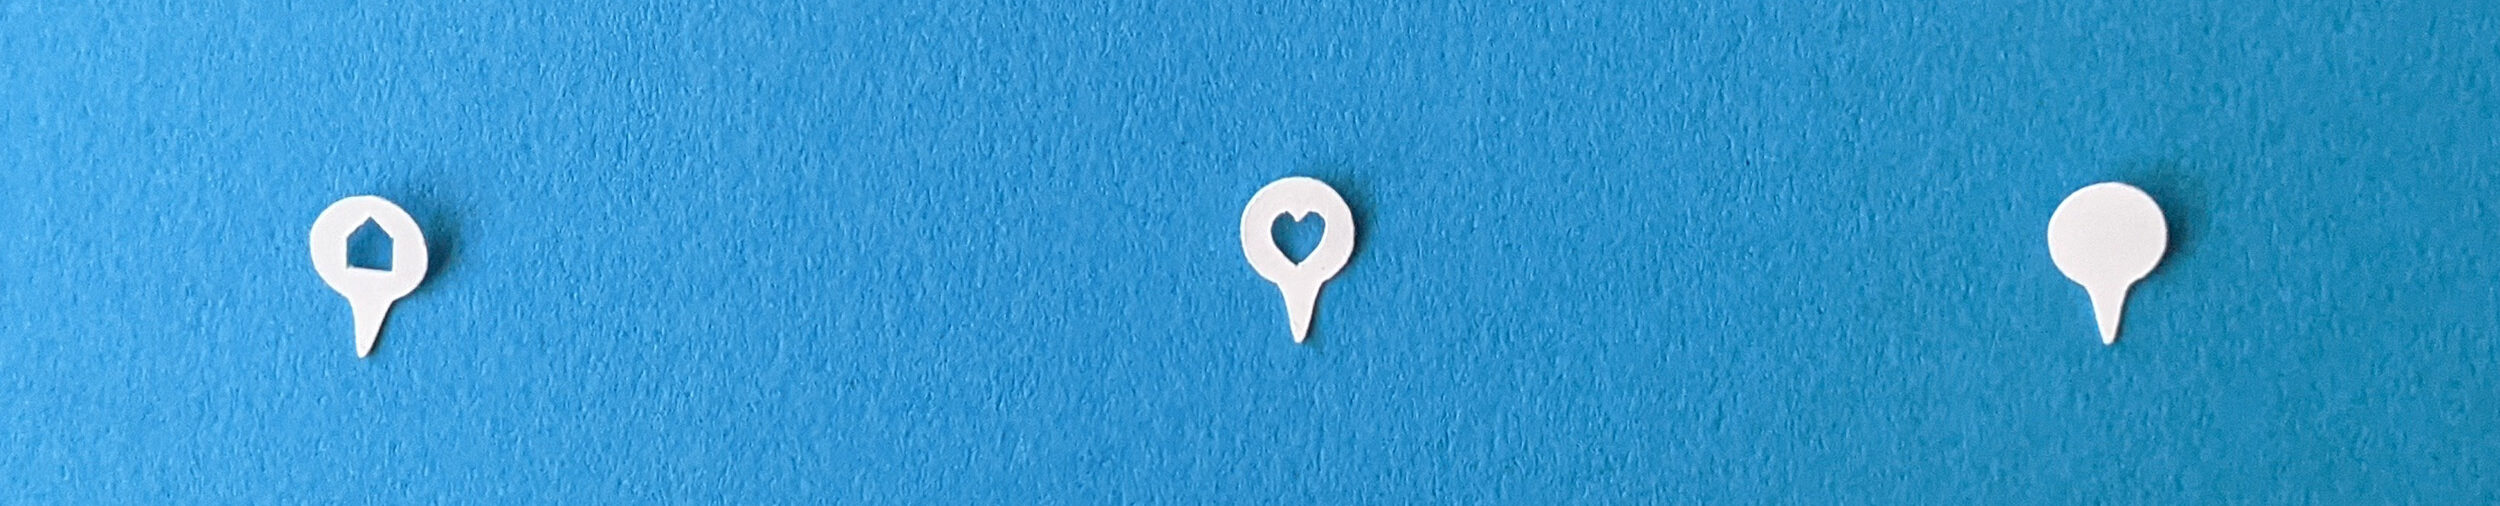 three white paper map marker pins on a blue background